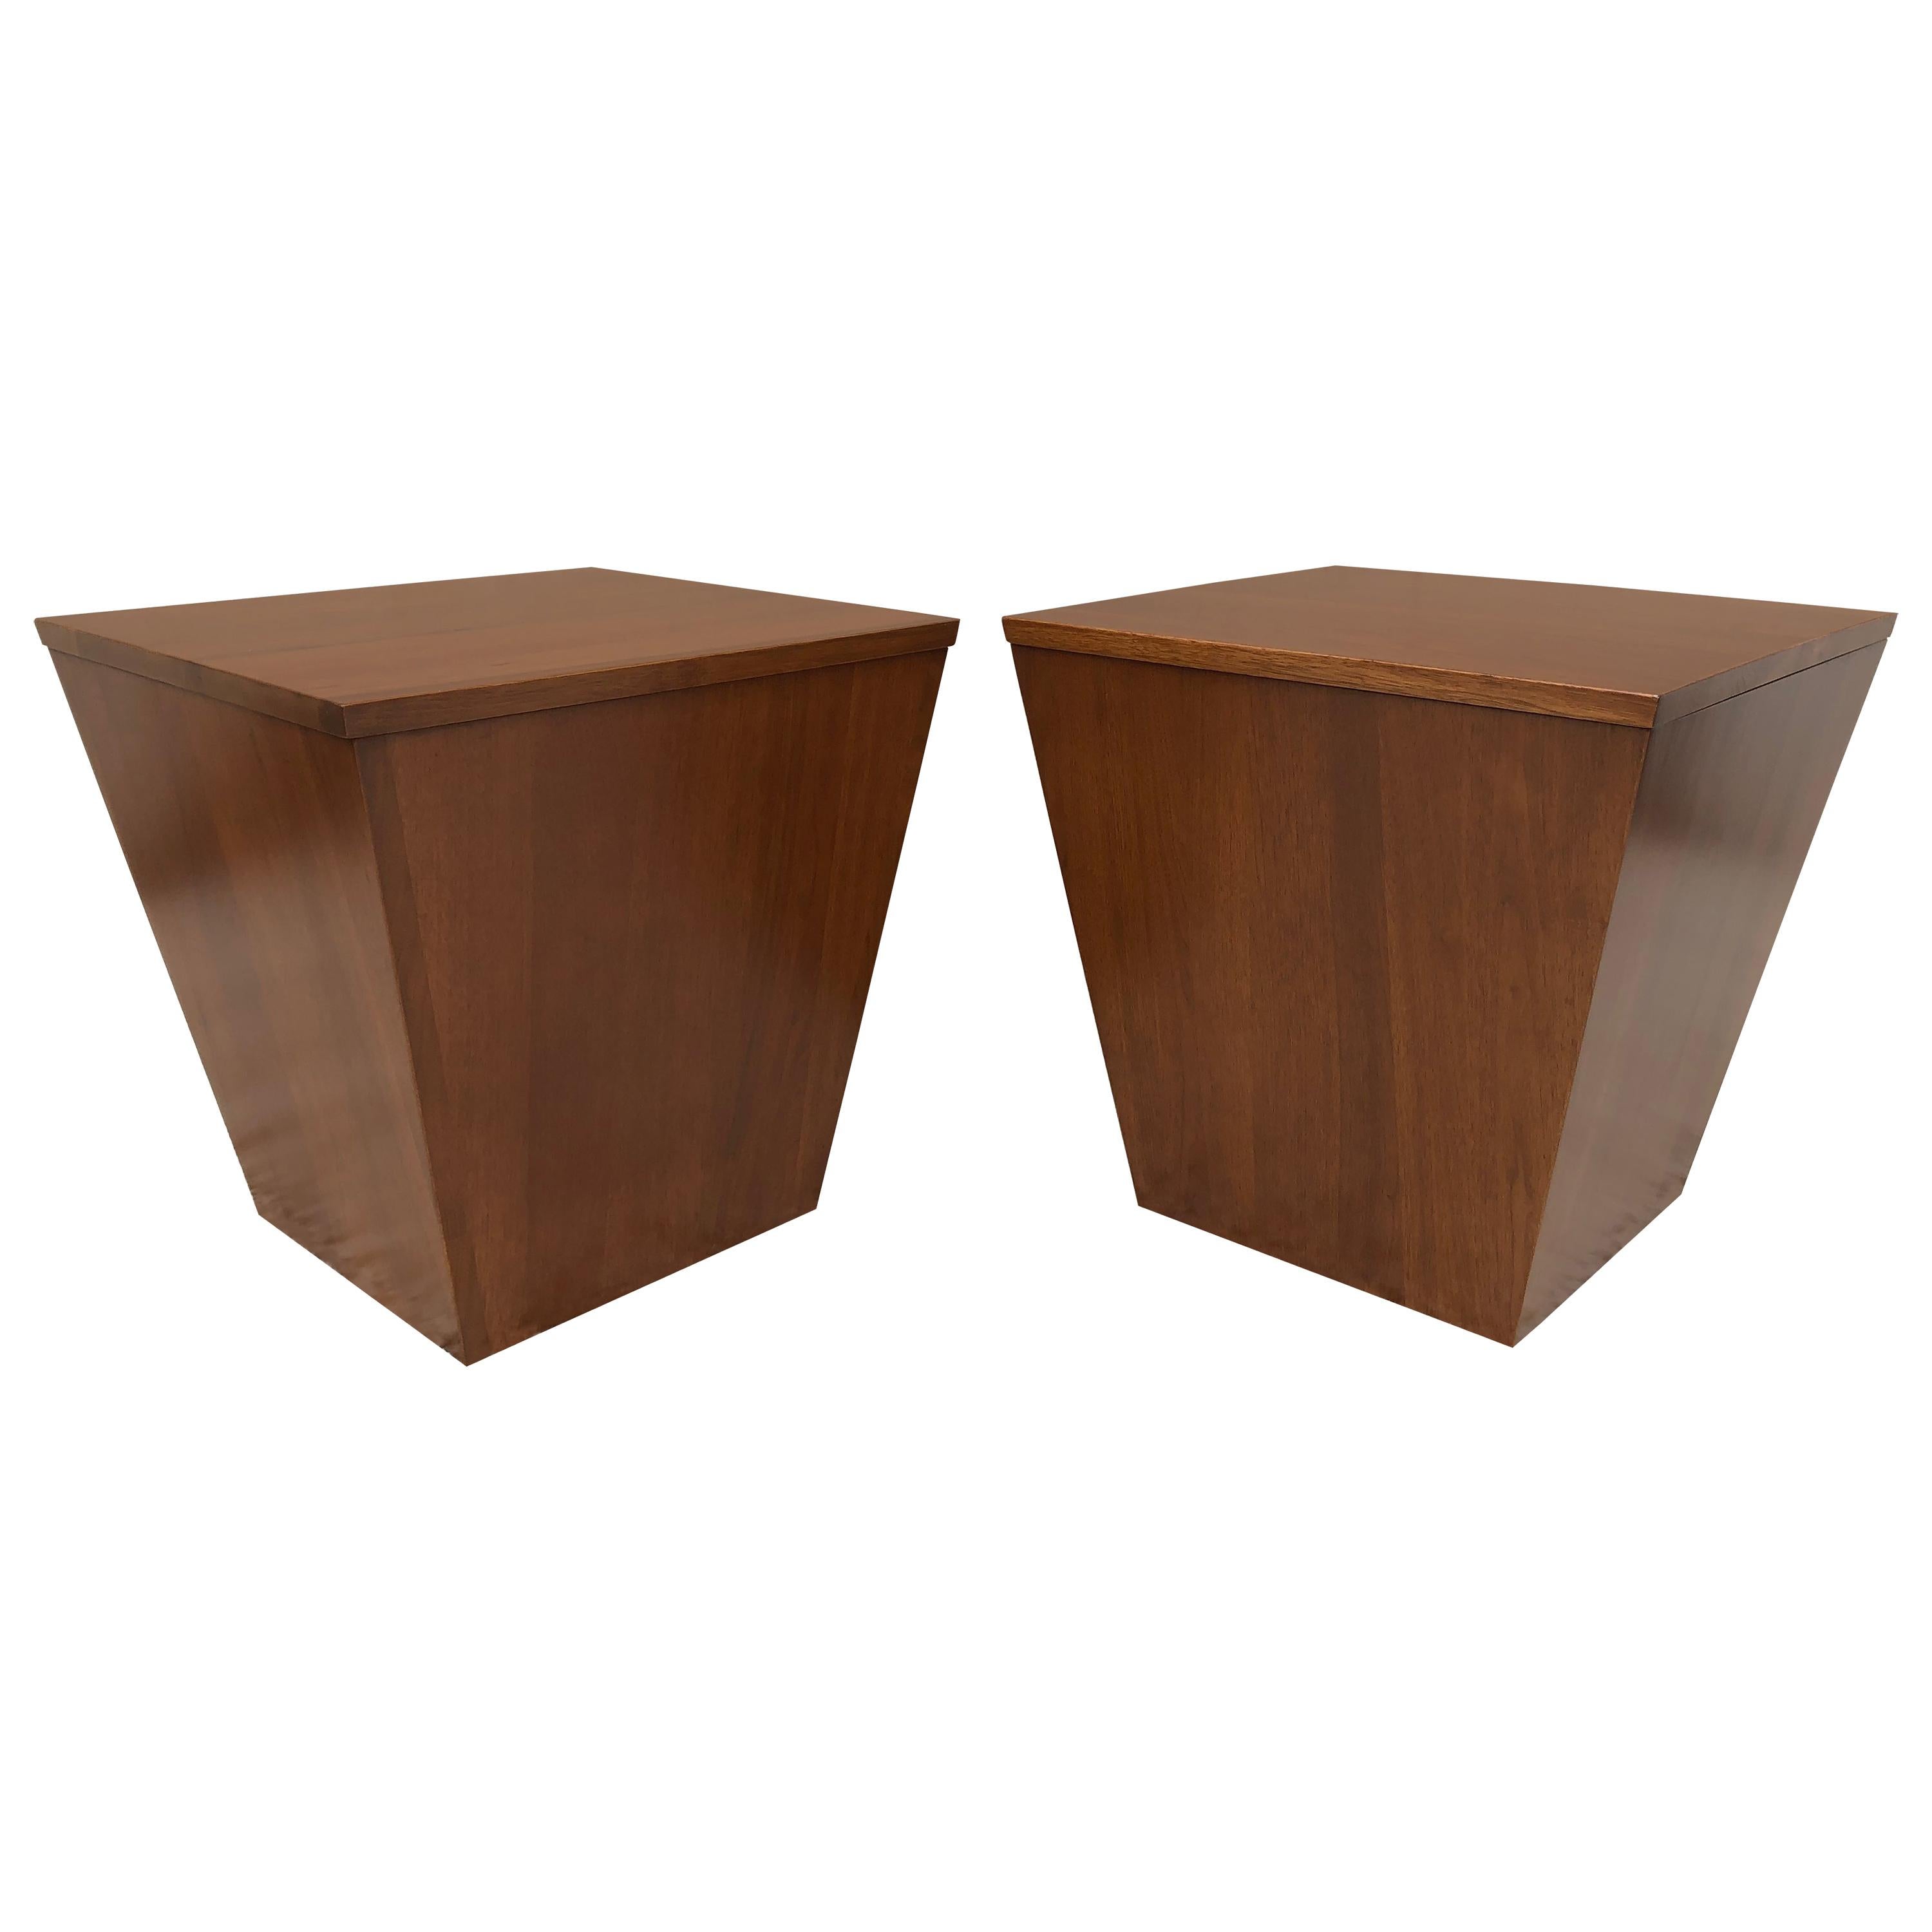 Pair of Midcentury End Table/ Cube Boxes with Storage Interiors